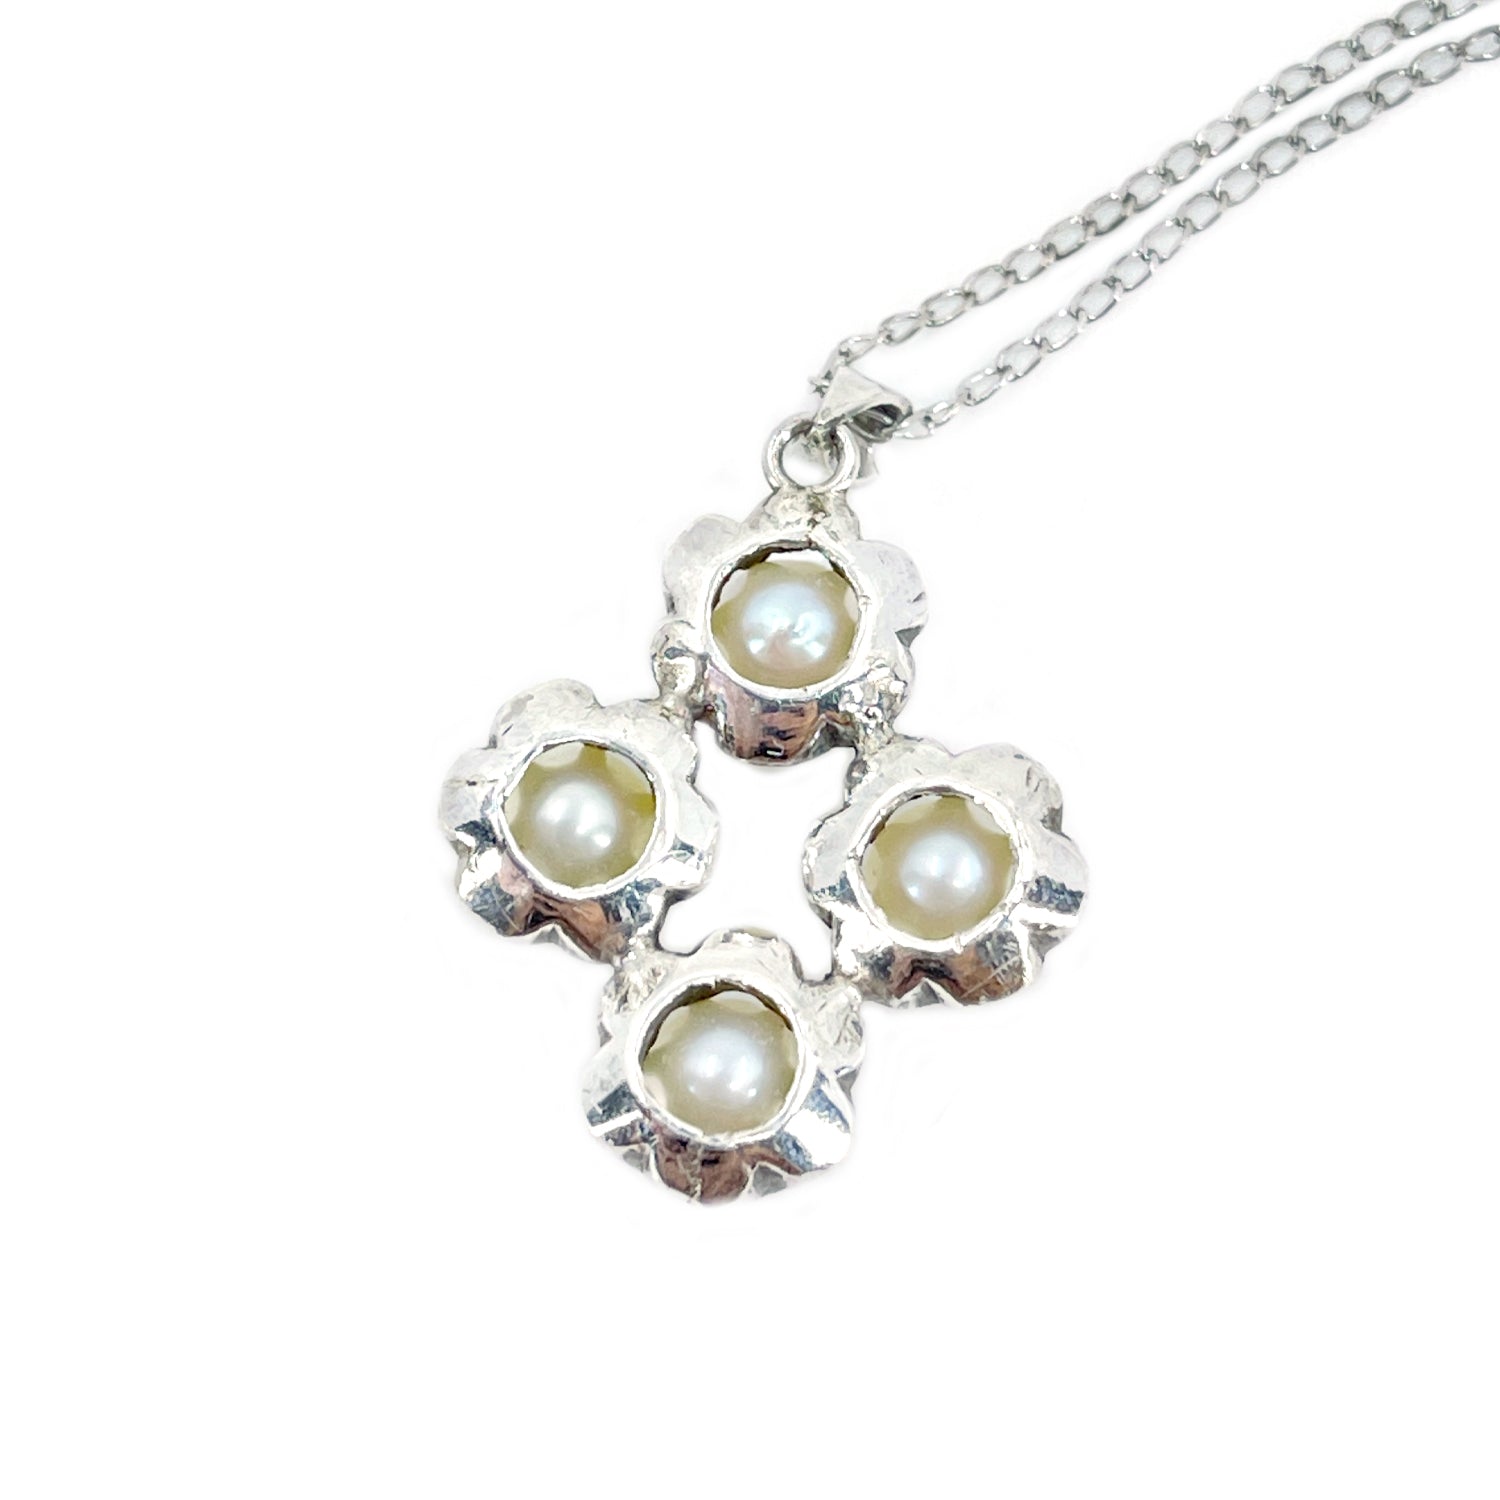 Gothic Claw Prong Vintage Japanese Cultured Akoya Pearl Pendant Necklace- Sterling Silver 18 Inch